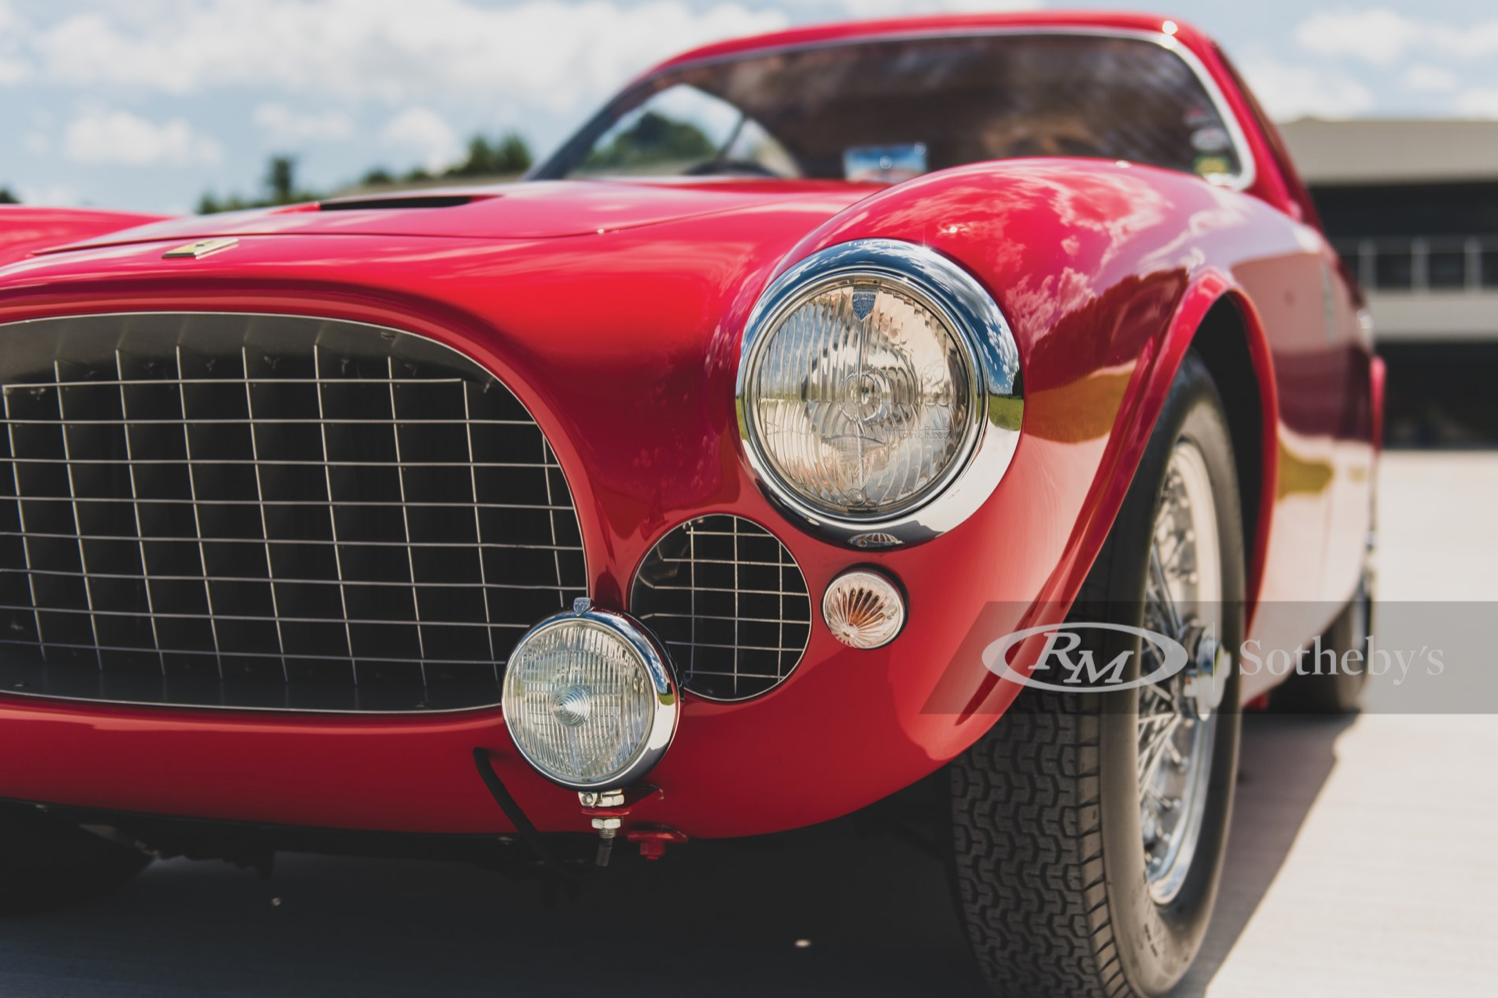 Auctions: RM Sotheby's “Elkhart Collection” Sale Brings $